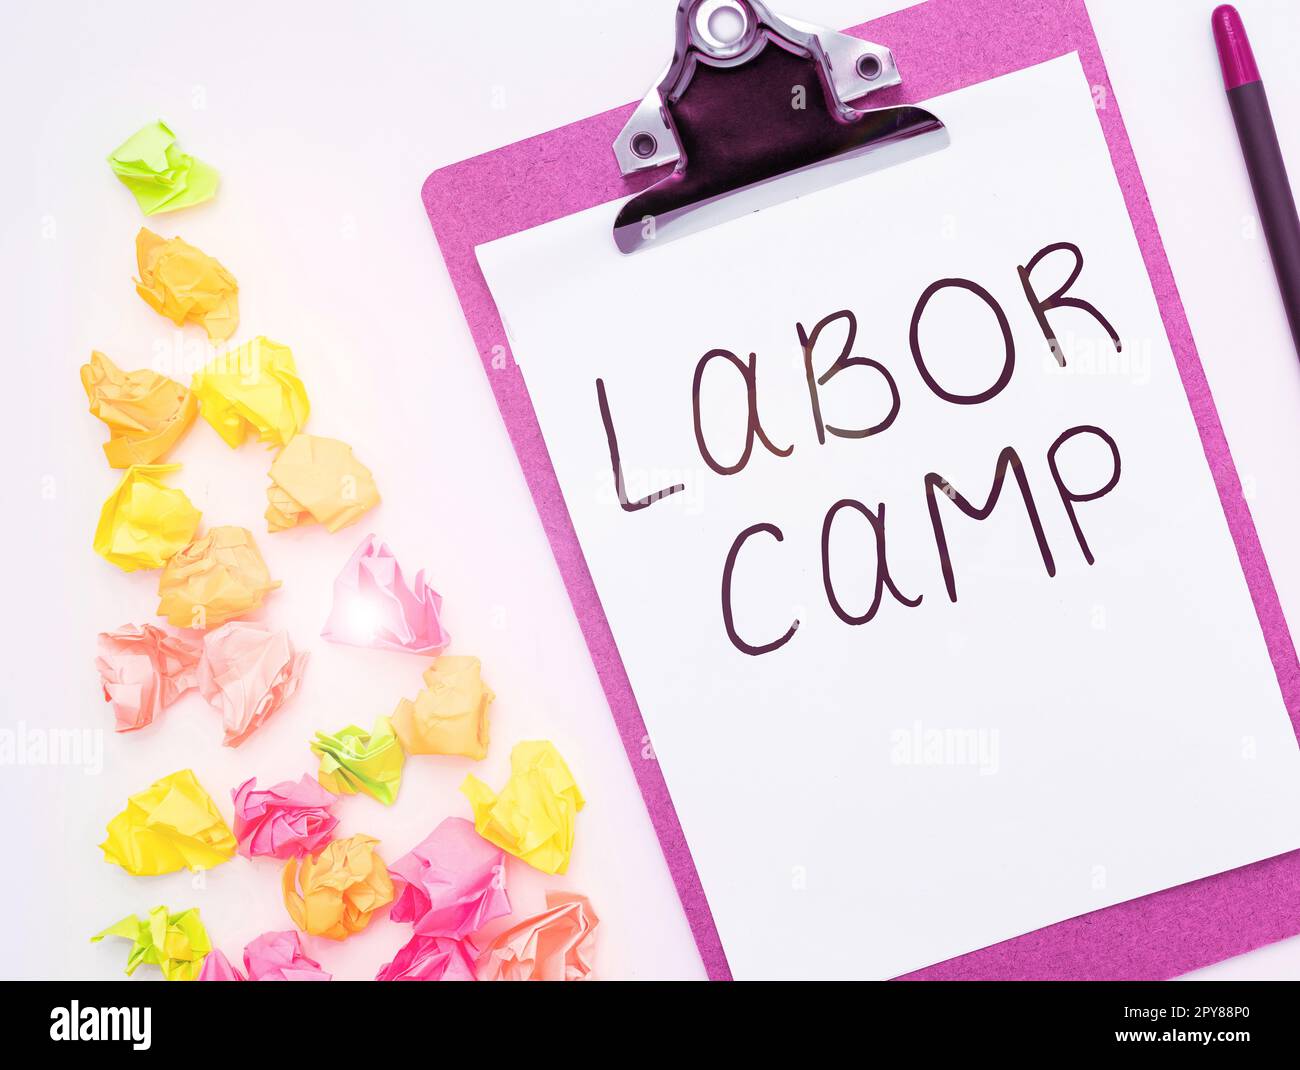 Conceptual caption Labor Camp. Concept meaning a penal colony where forced labor is performed Stock Photo